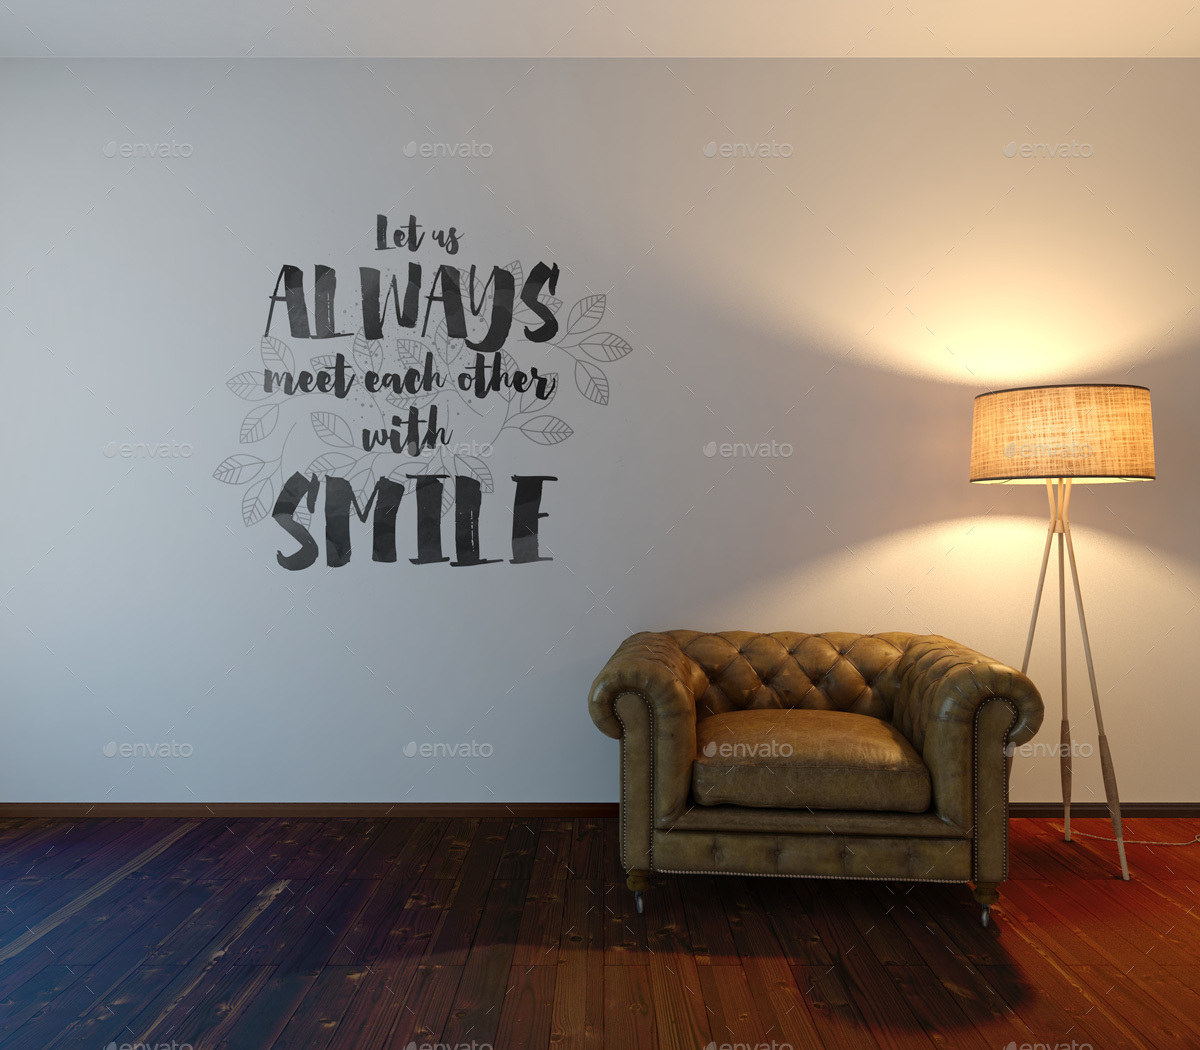 Download Wall Art Mockup by pozitivo | GraphicRiver